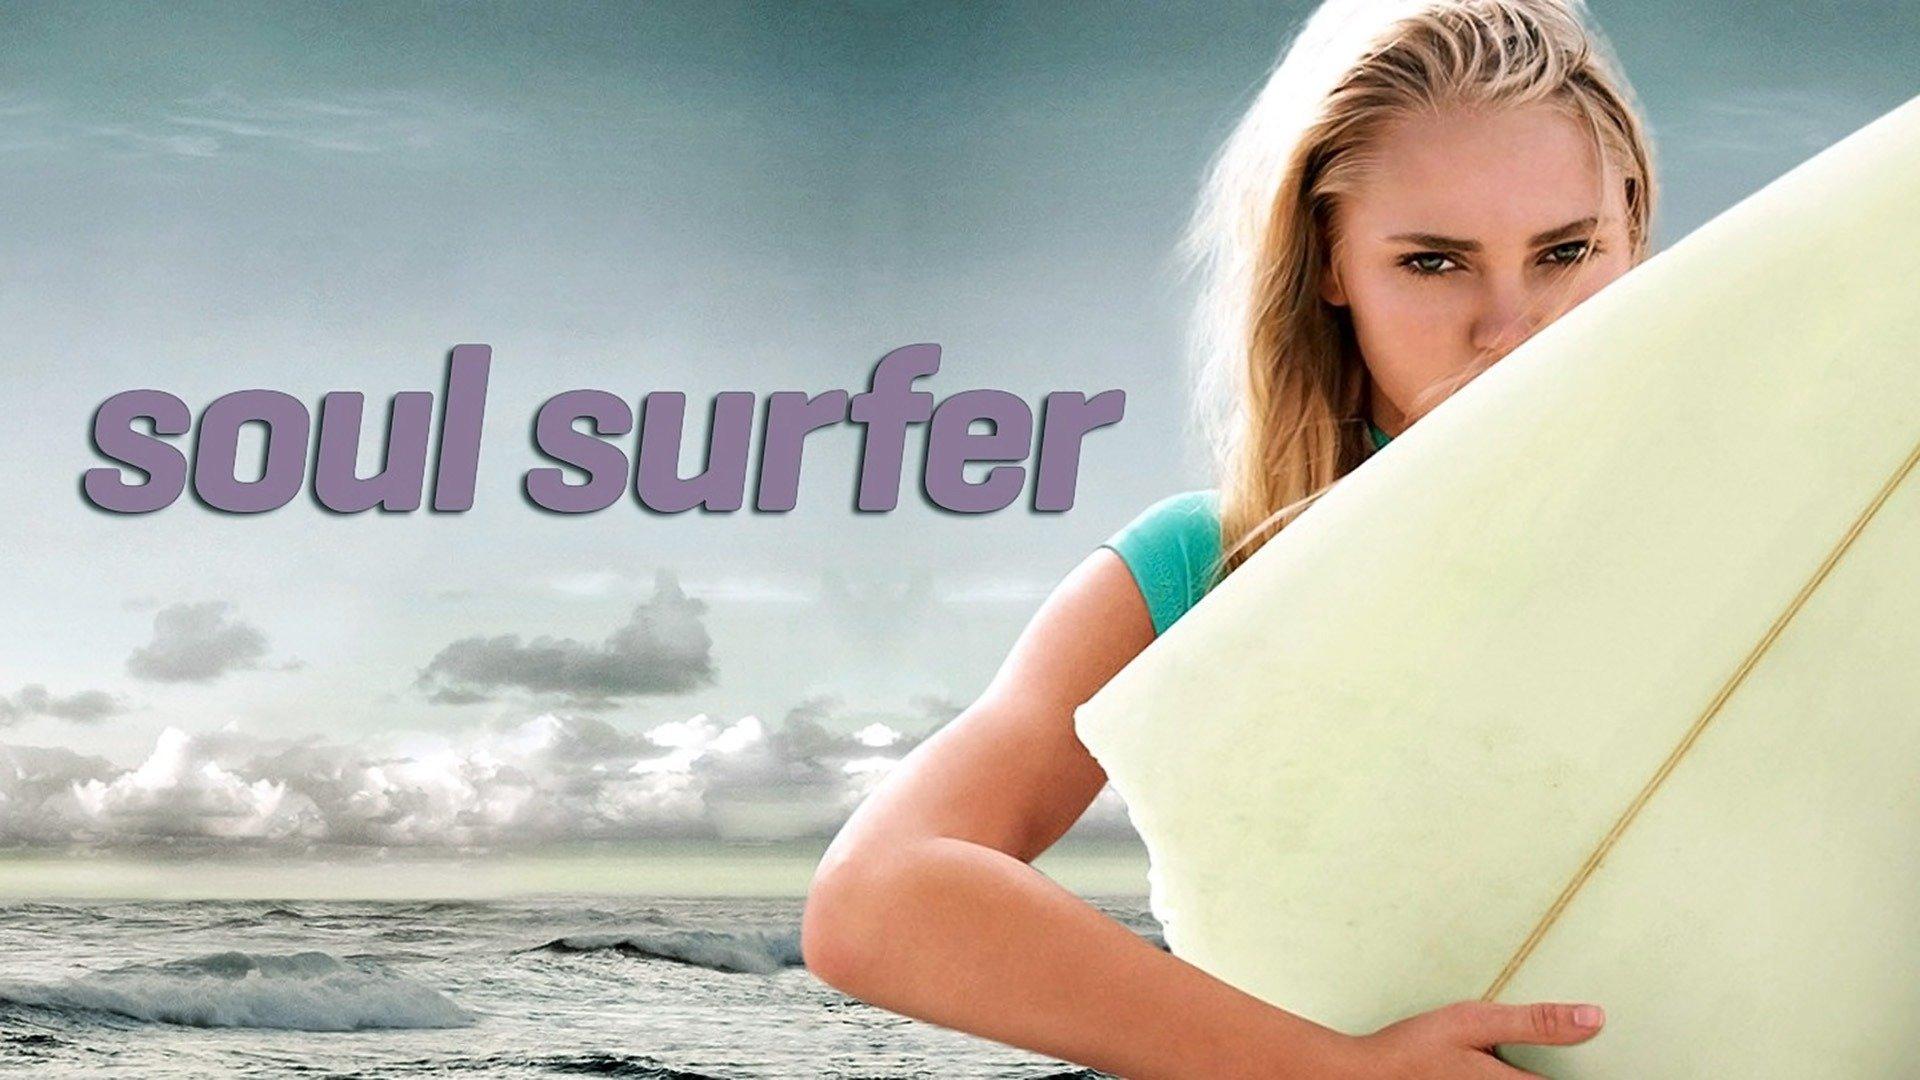 Watch Soul Surfer Streaming Online on Philo (Free Trial)